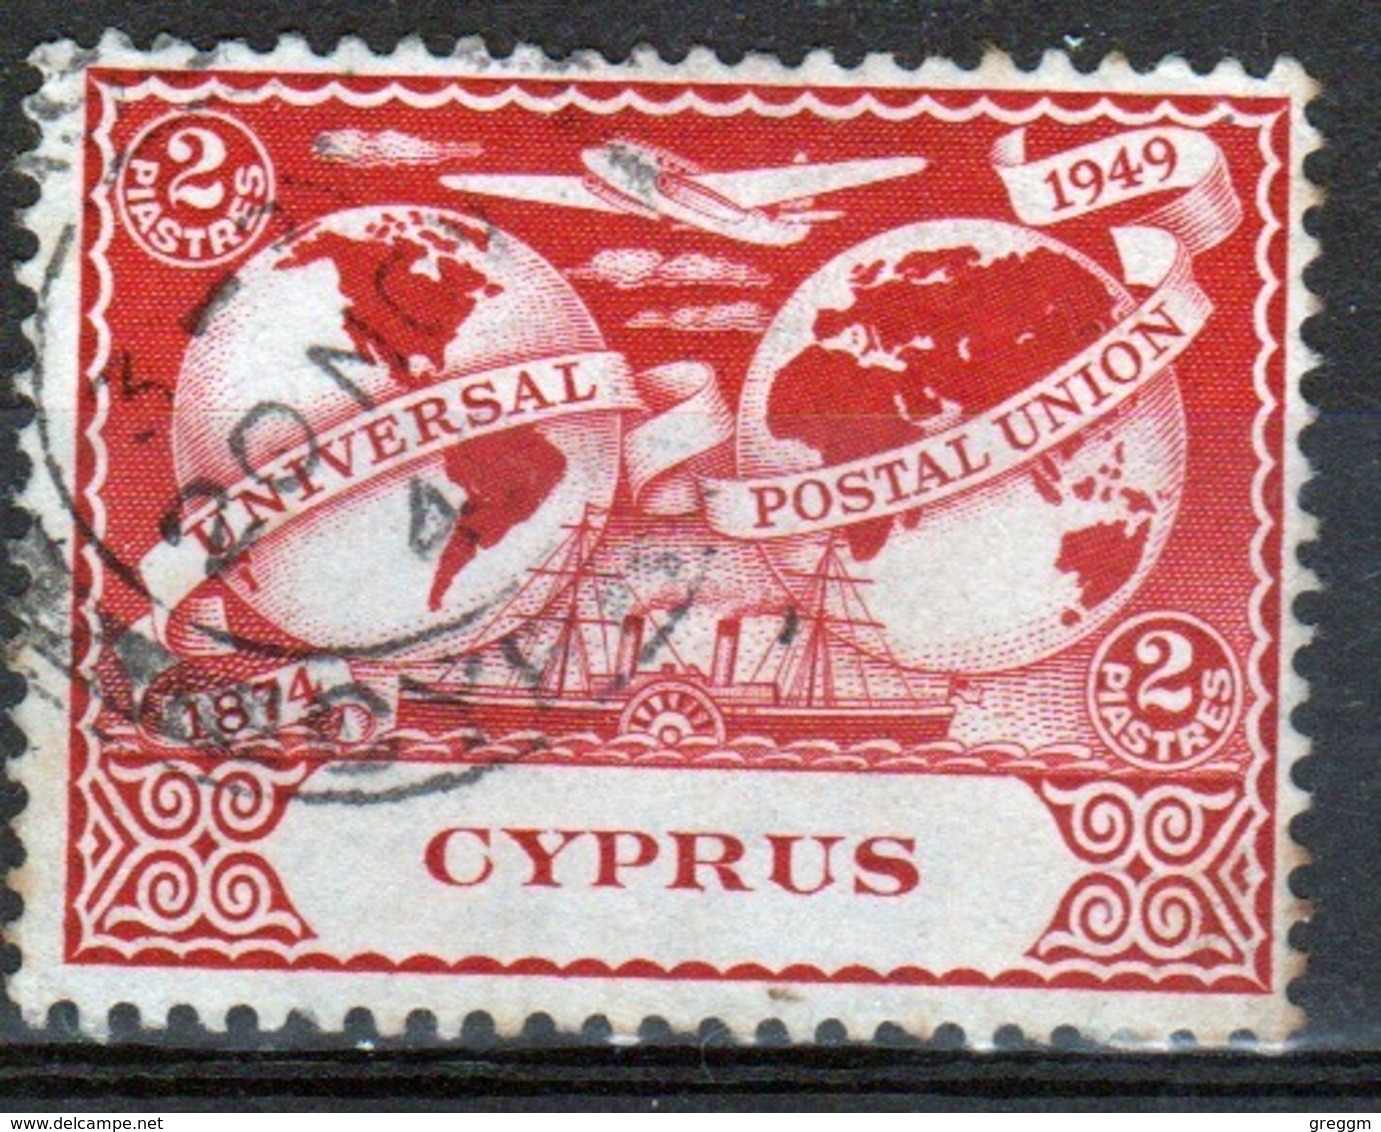 Cyprus Single 1949 Two Piastre Stamp From 75th Anniversary Of UPU Set. - Cyprus (...-1960)